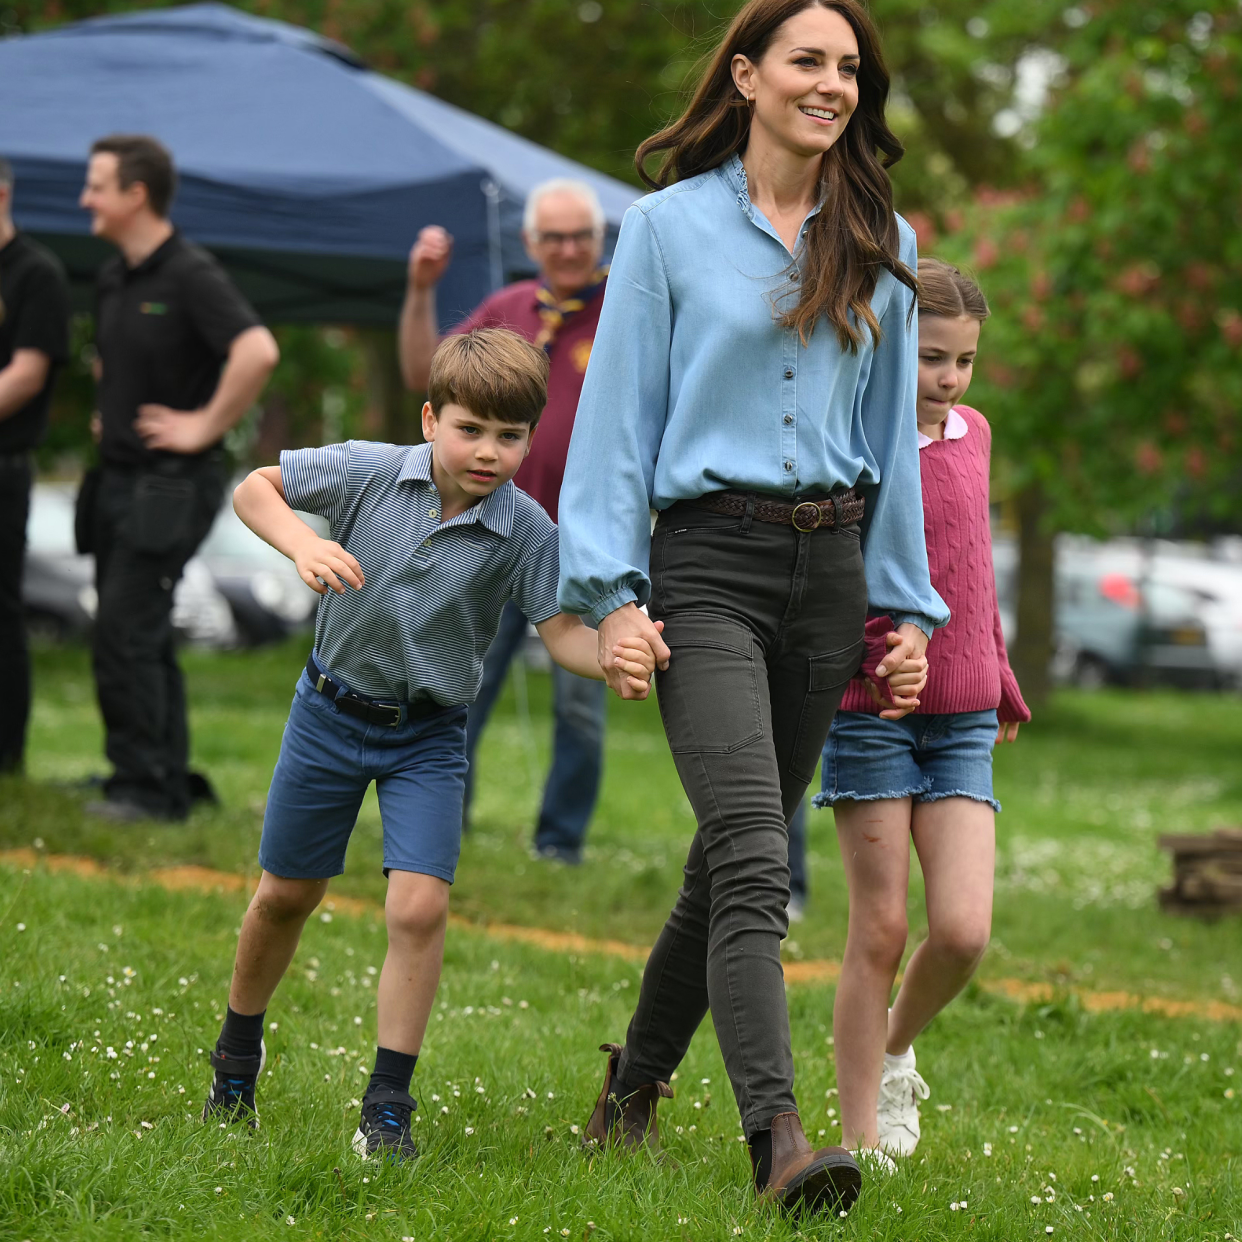  Prince Louis of Wales and Princess Charlotte of Wales walk with their mother, Catherine, Princess of Wales while taking part in the Big Help Out, during a visit to the 3rd Upton Scouts Hut in Slough on May 8, 2023 in London, England. The Big Help Out is a day when people are encouraged to volunteer in their communities. It is part of the celebrations of the Coronation of Charles III and his wife, Camilla, as King and Queen of the United Kingdom of Great Britain and Northern Ireland, and the other Commonwealth realms that took place at Westminster Abbey on Saturday, May 6, 2023. 